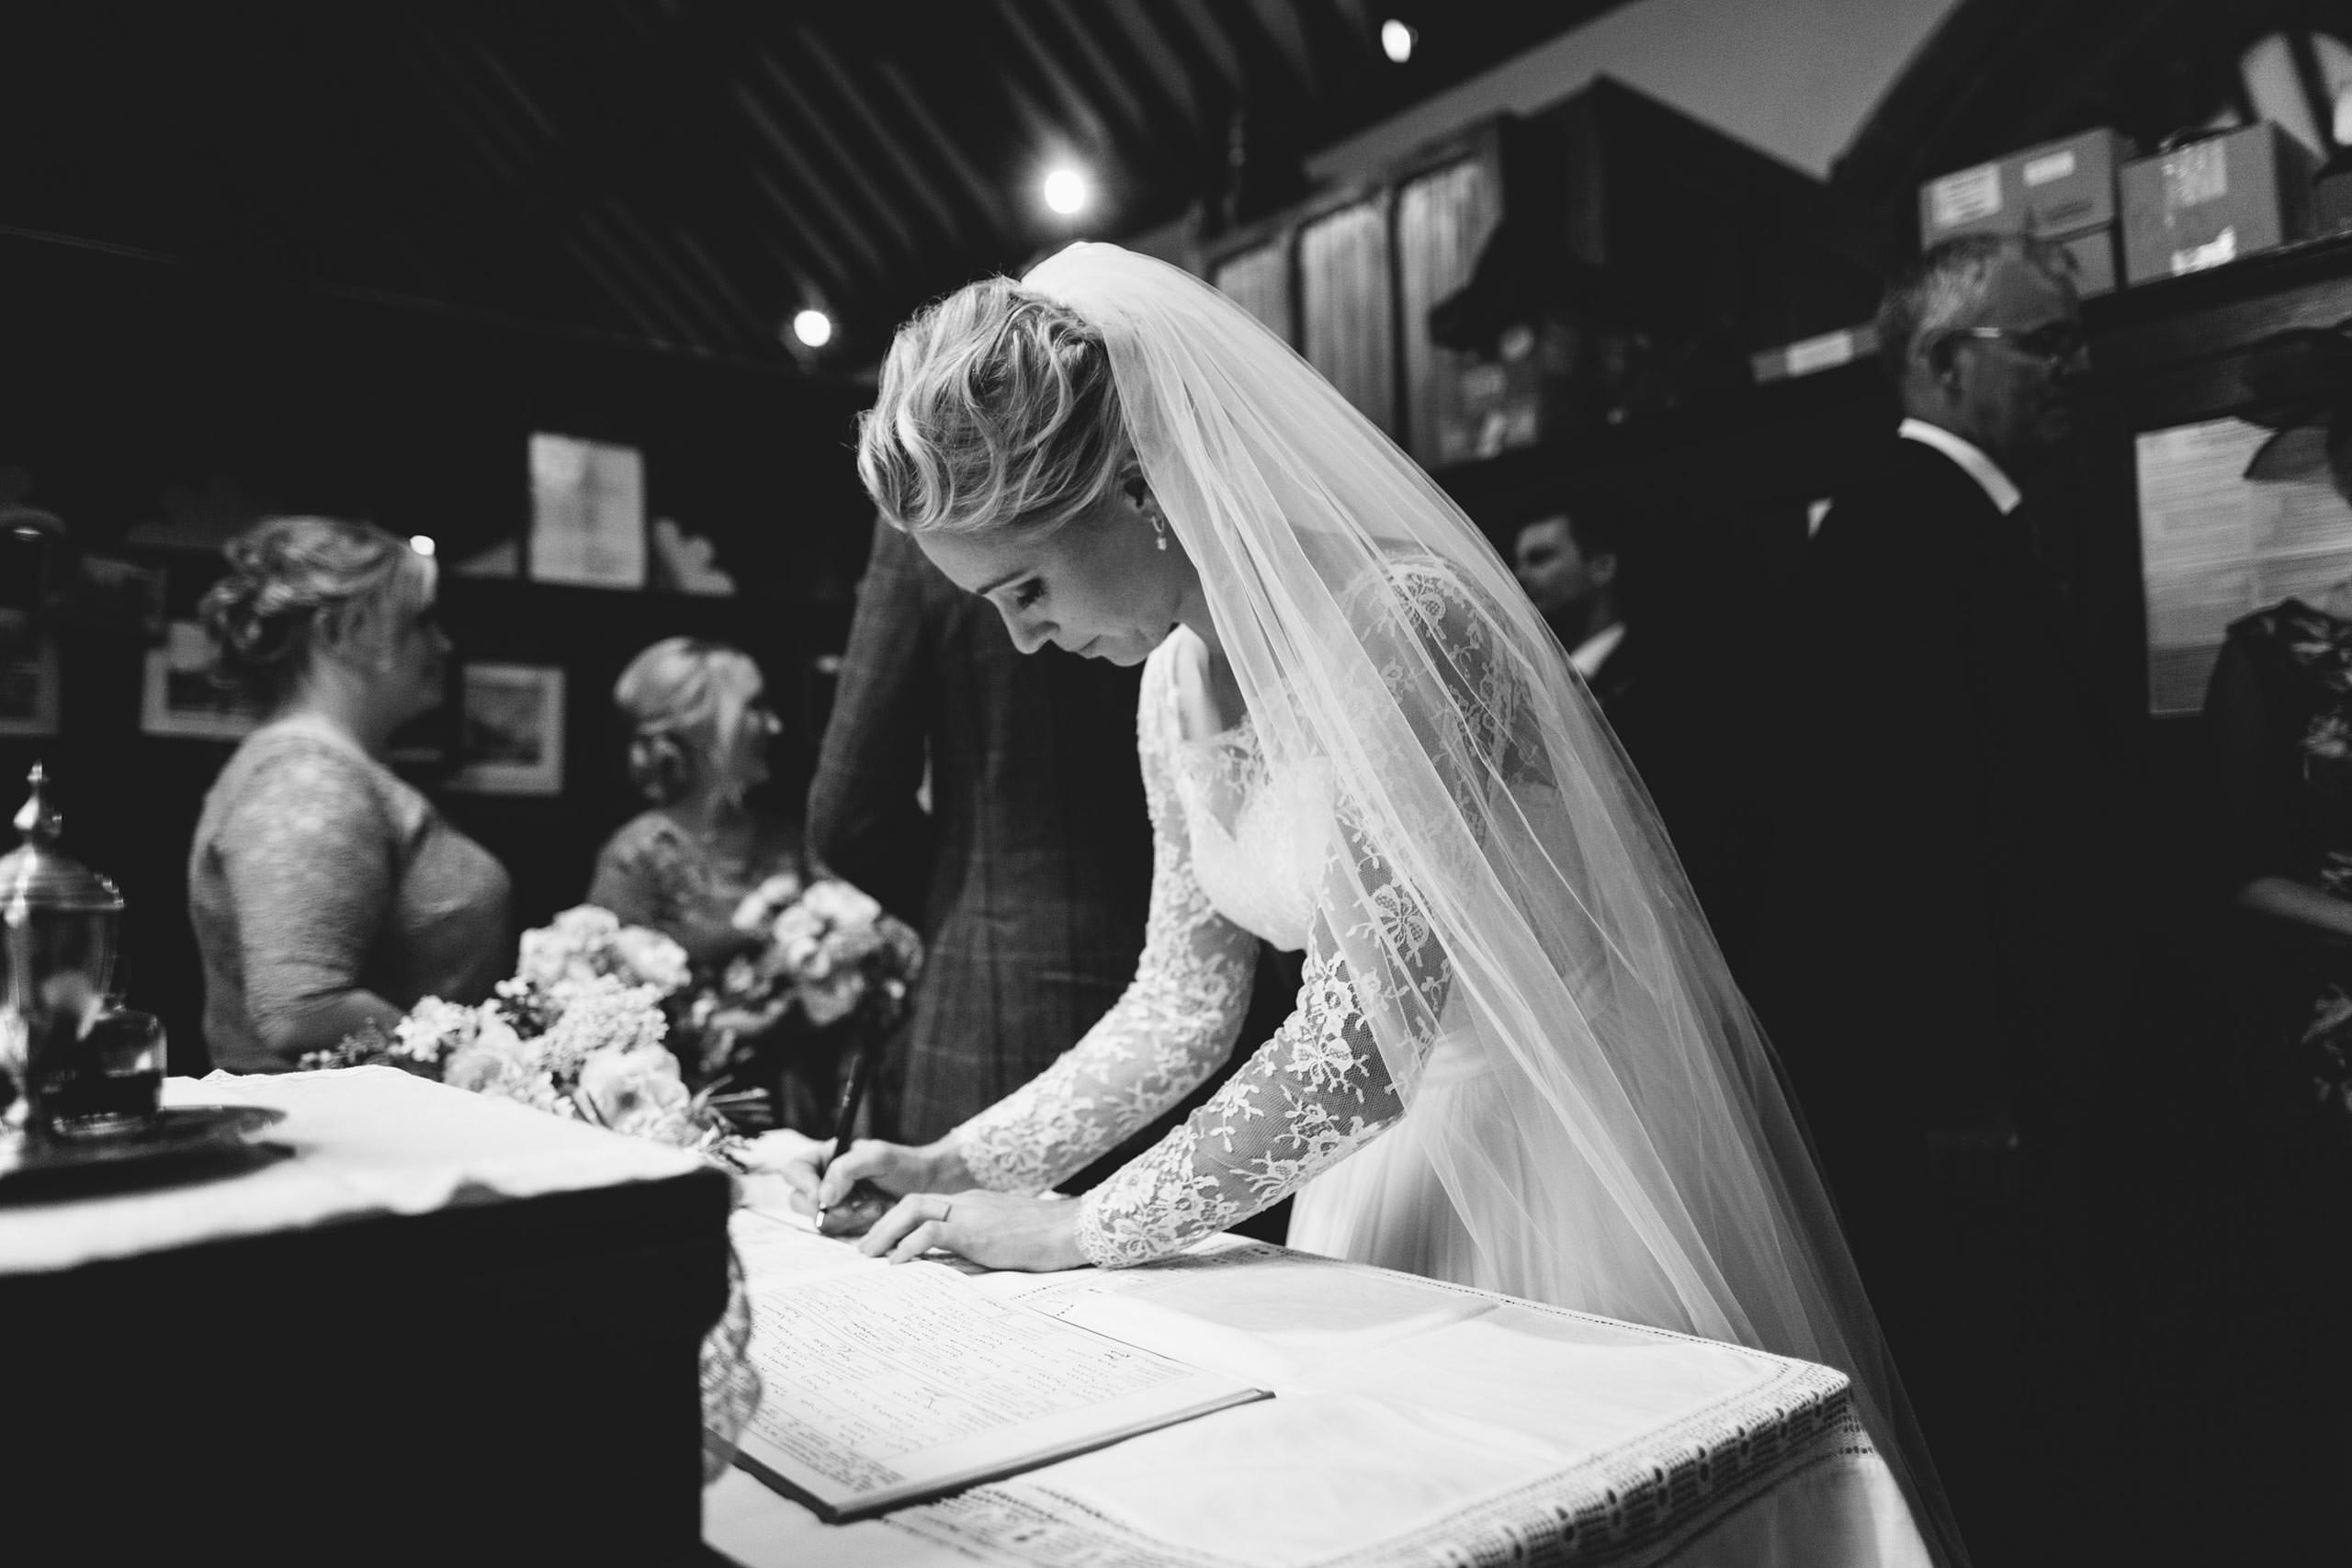 A documentary wedding photographer capturing a bride signing her wedding vows in a church.